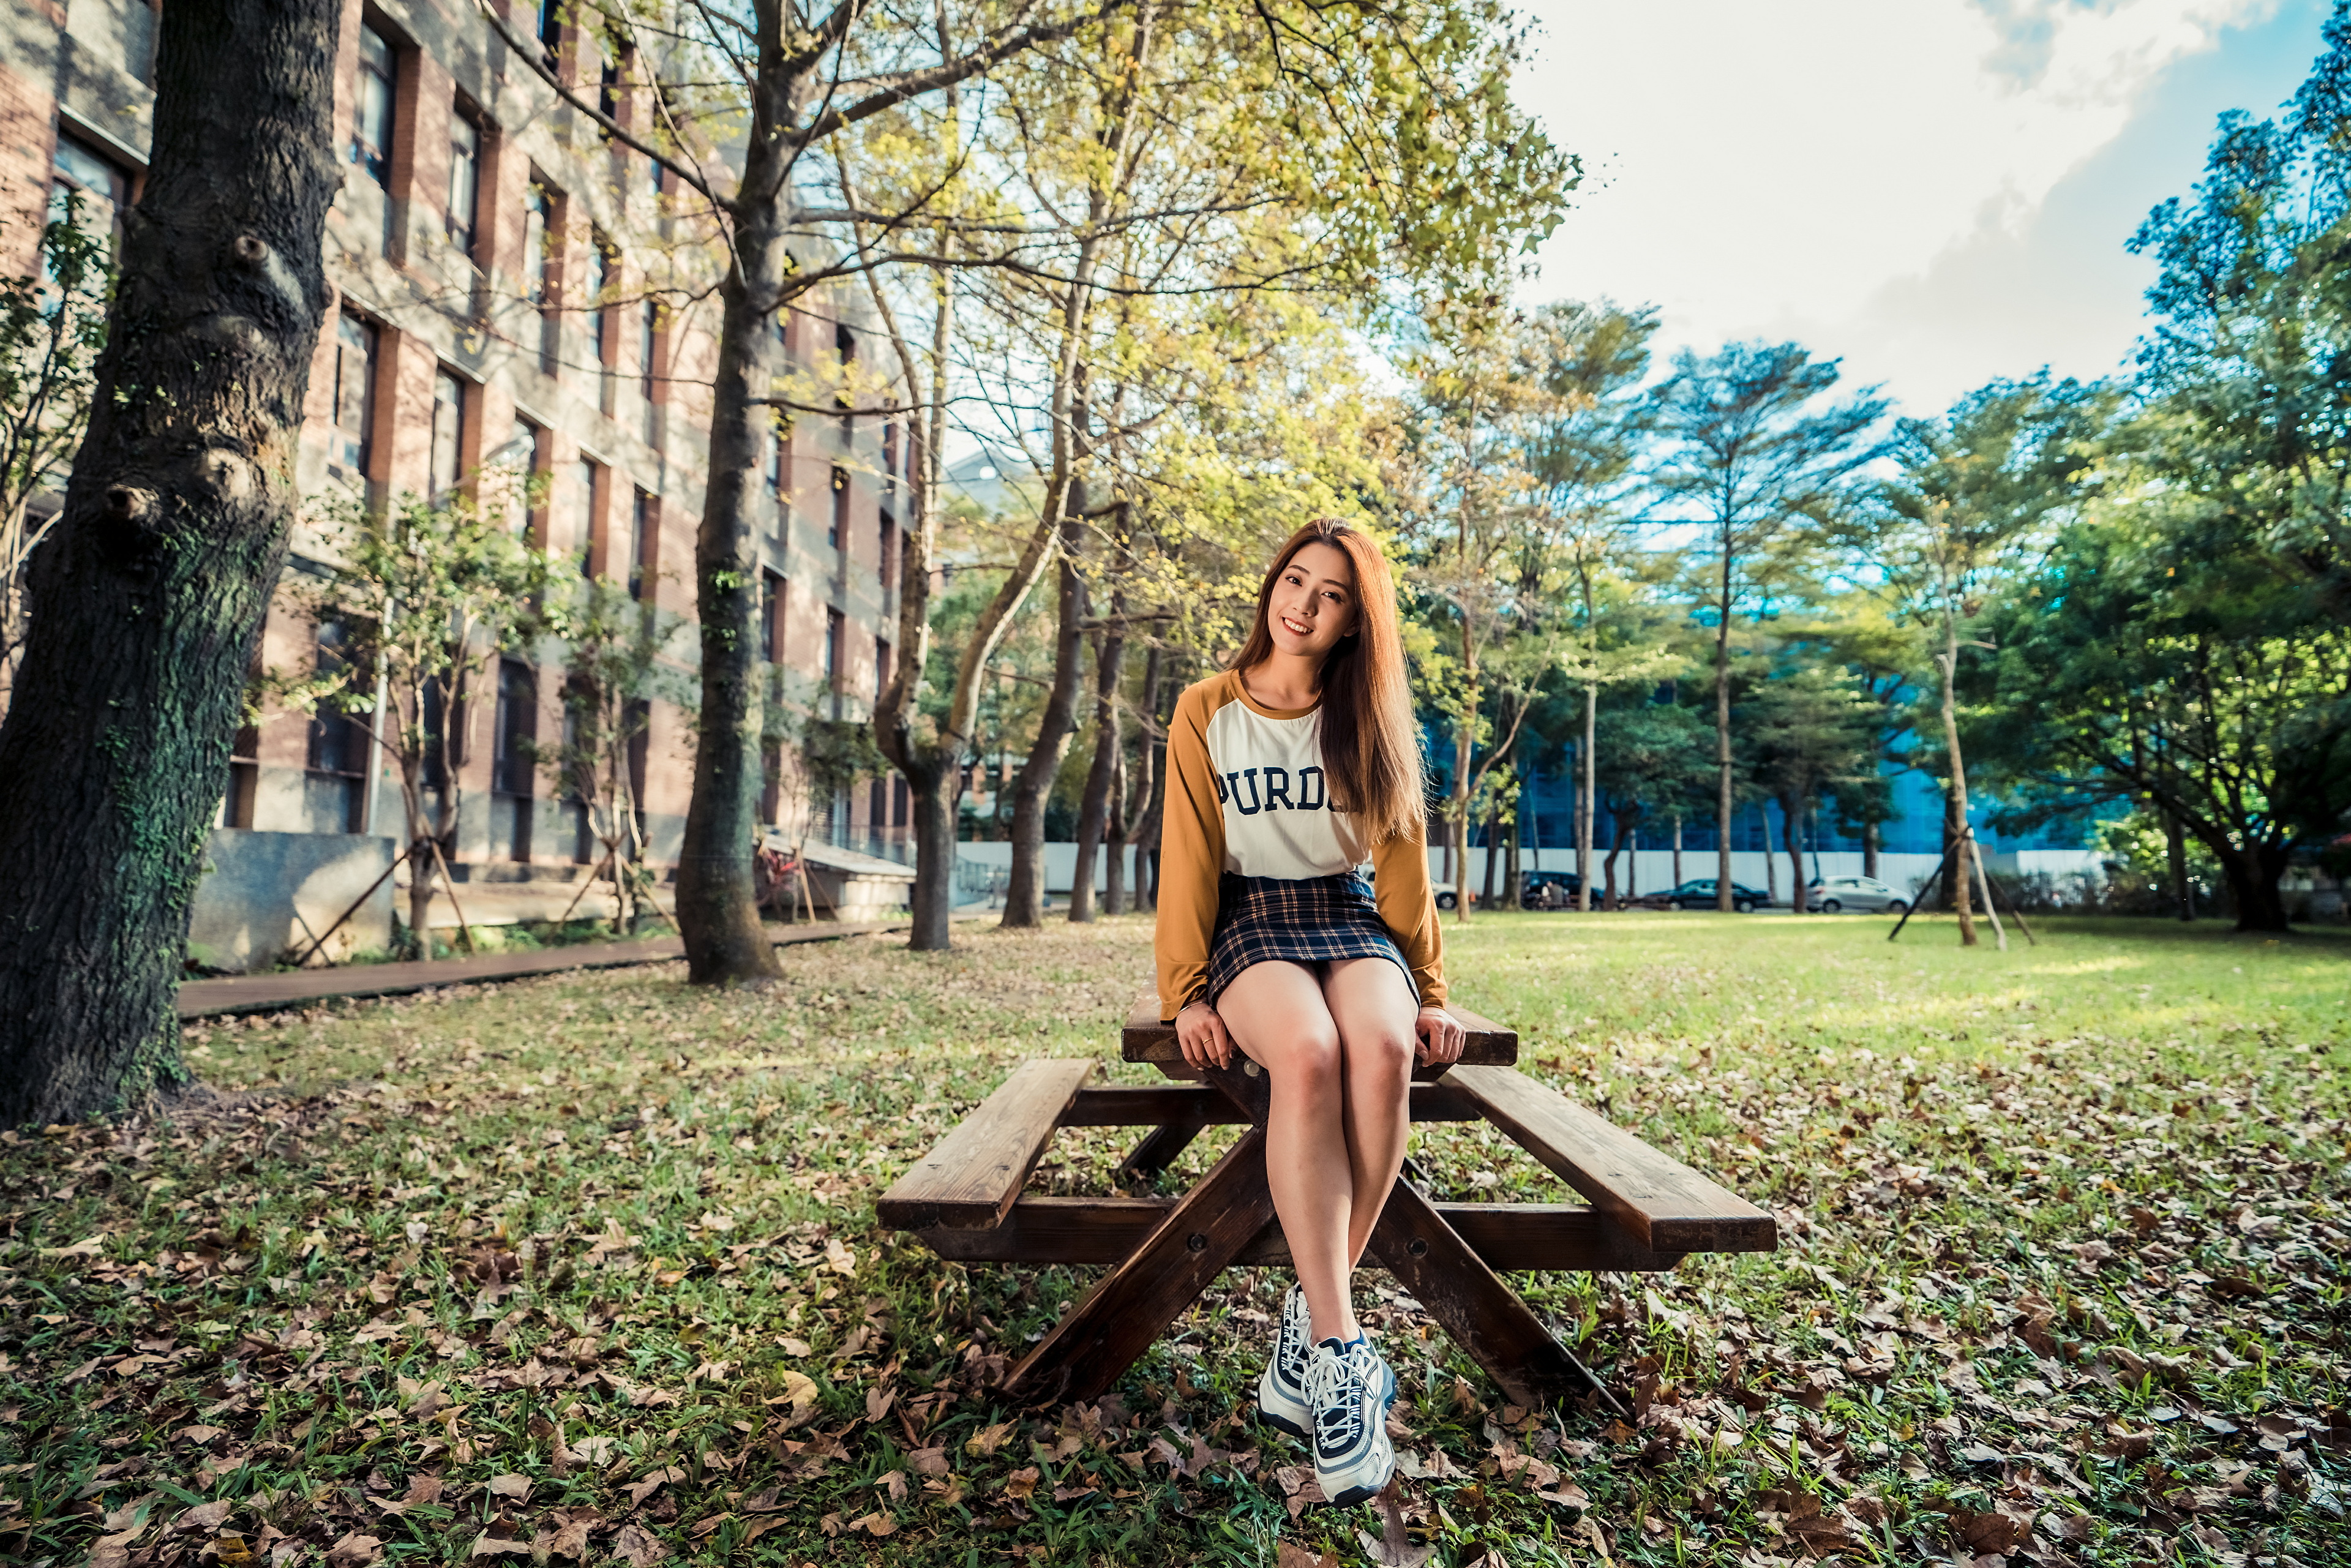 People 3840x2561 Asian women model long hair brunette sitting table bench park building leaves grass trees pullover skirt sneakers sweatshirts women outdoors